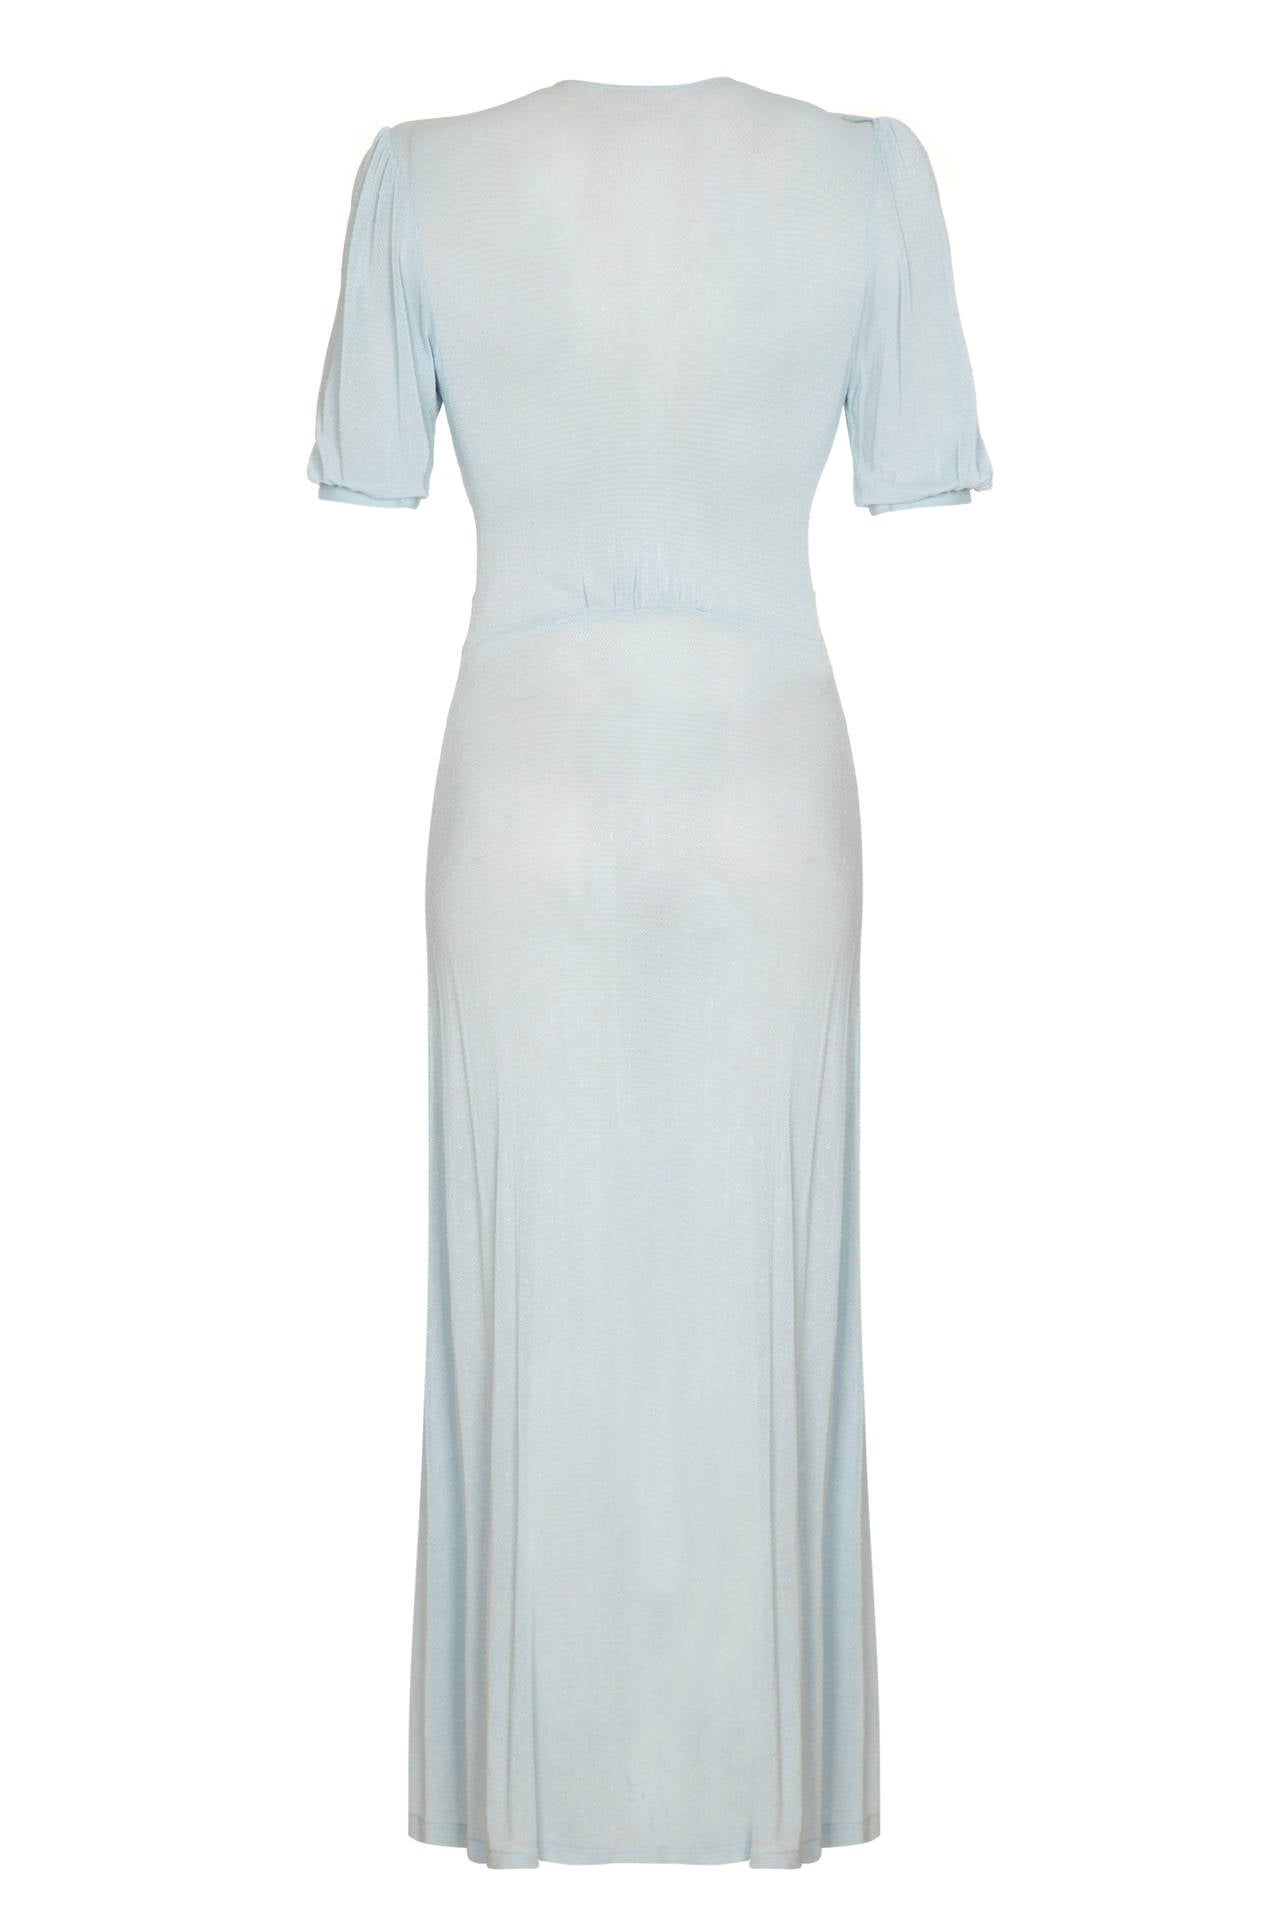 Beautifully soft pale blue fine knit dress with short puff sleeves, deep V neckline and pretty shaping around the bust.  A very wearable dress with no fastenings, it just slips on over the head and is in excellent condition.